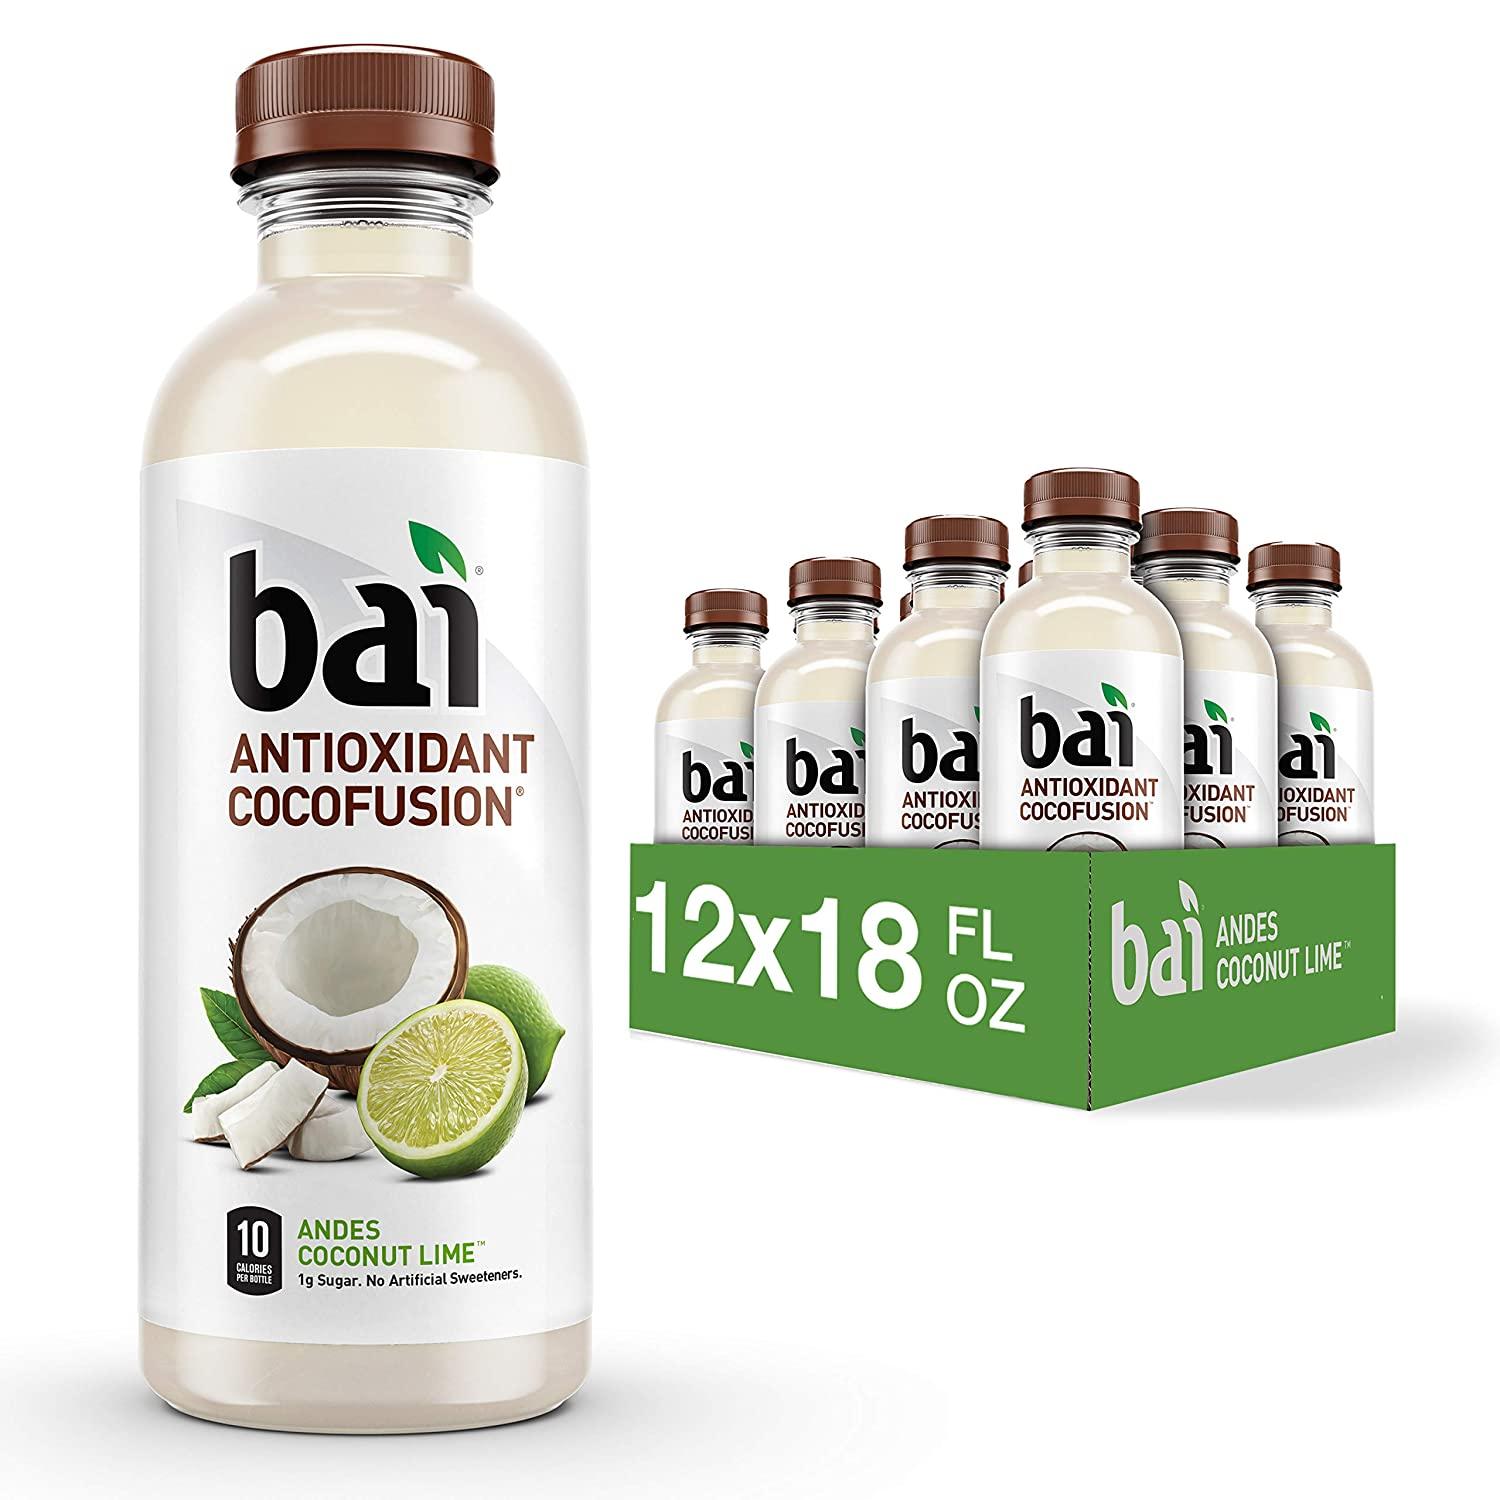 6 Bai Coconut Flavored Water for $7.13 Shipped